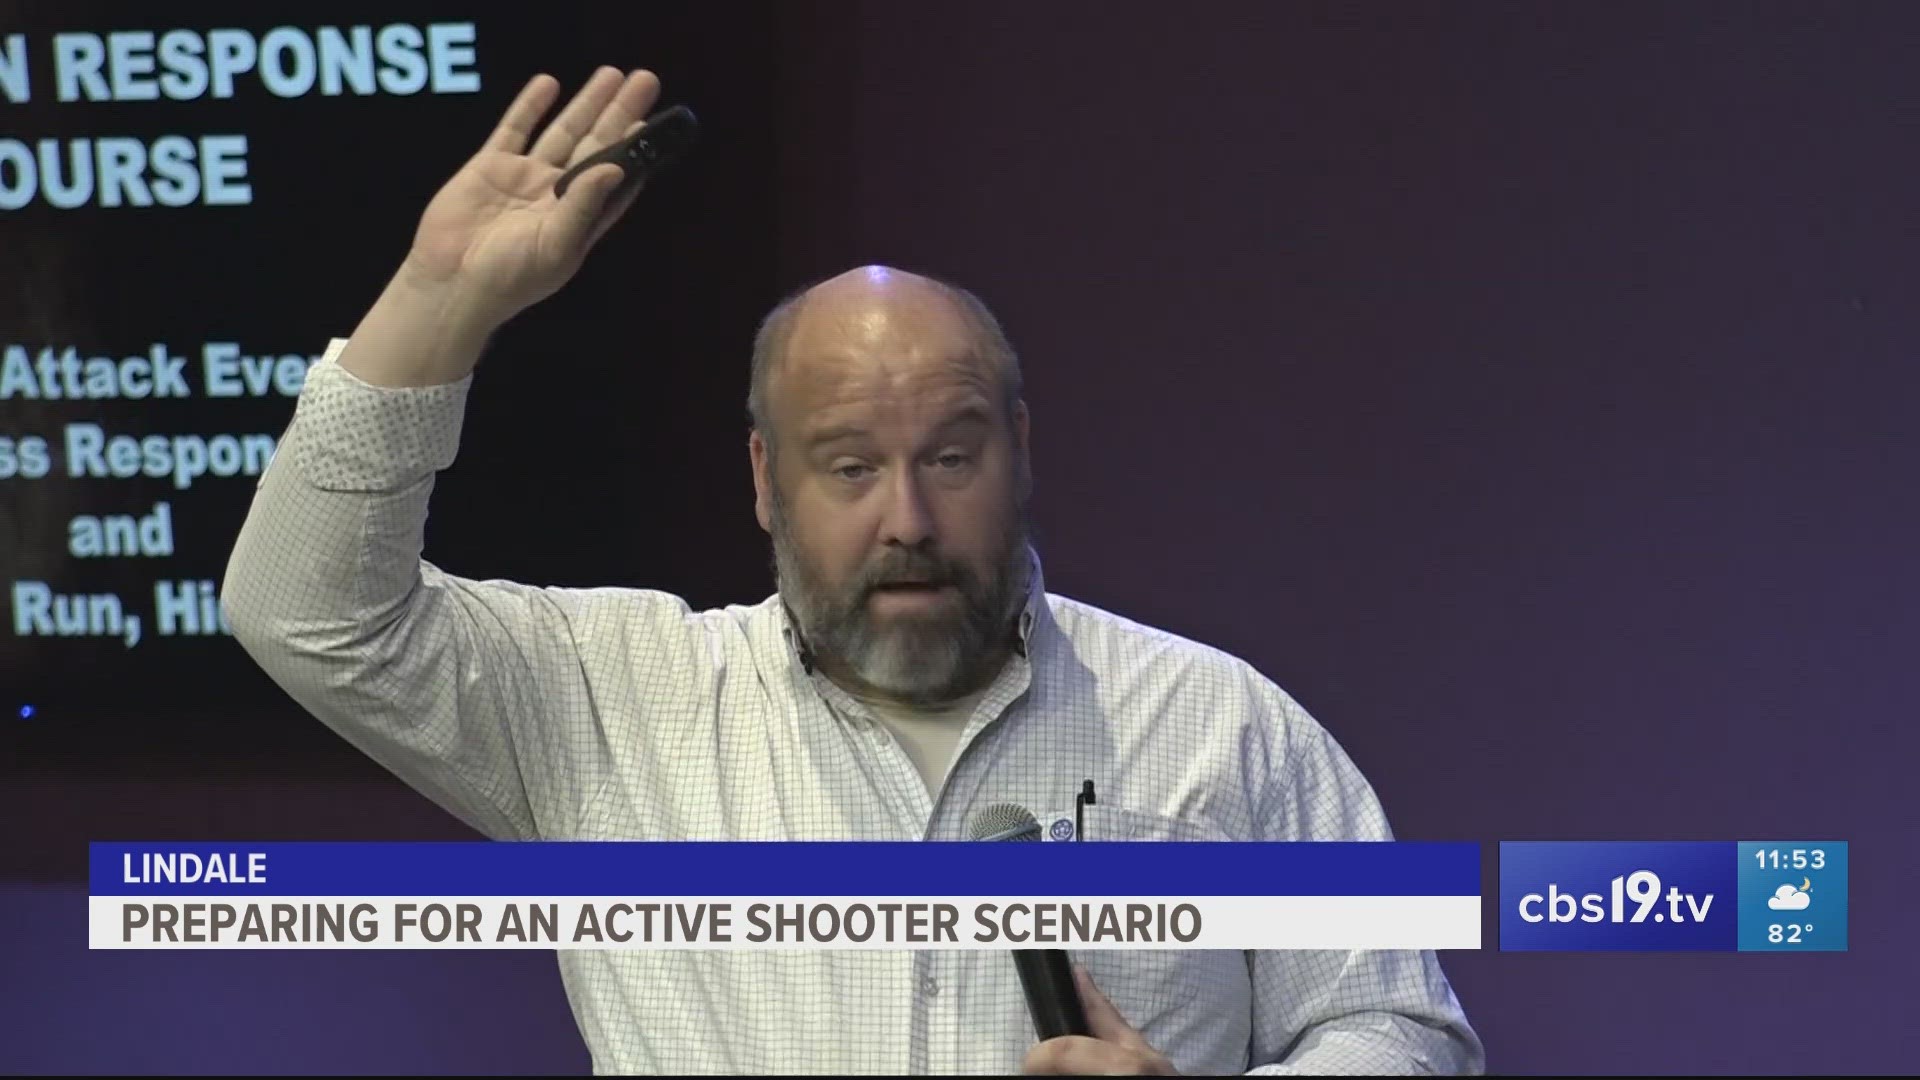 Smith County detective gives citizen active shooter response training at Calvary Commission in Lindale